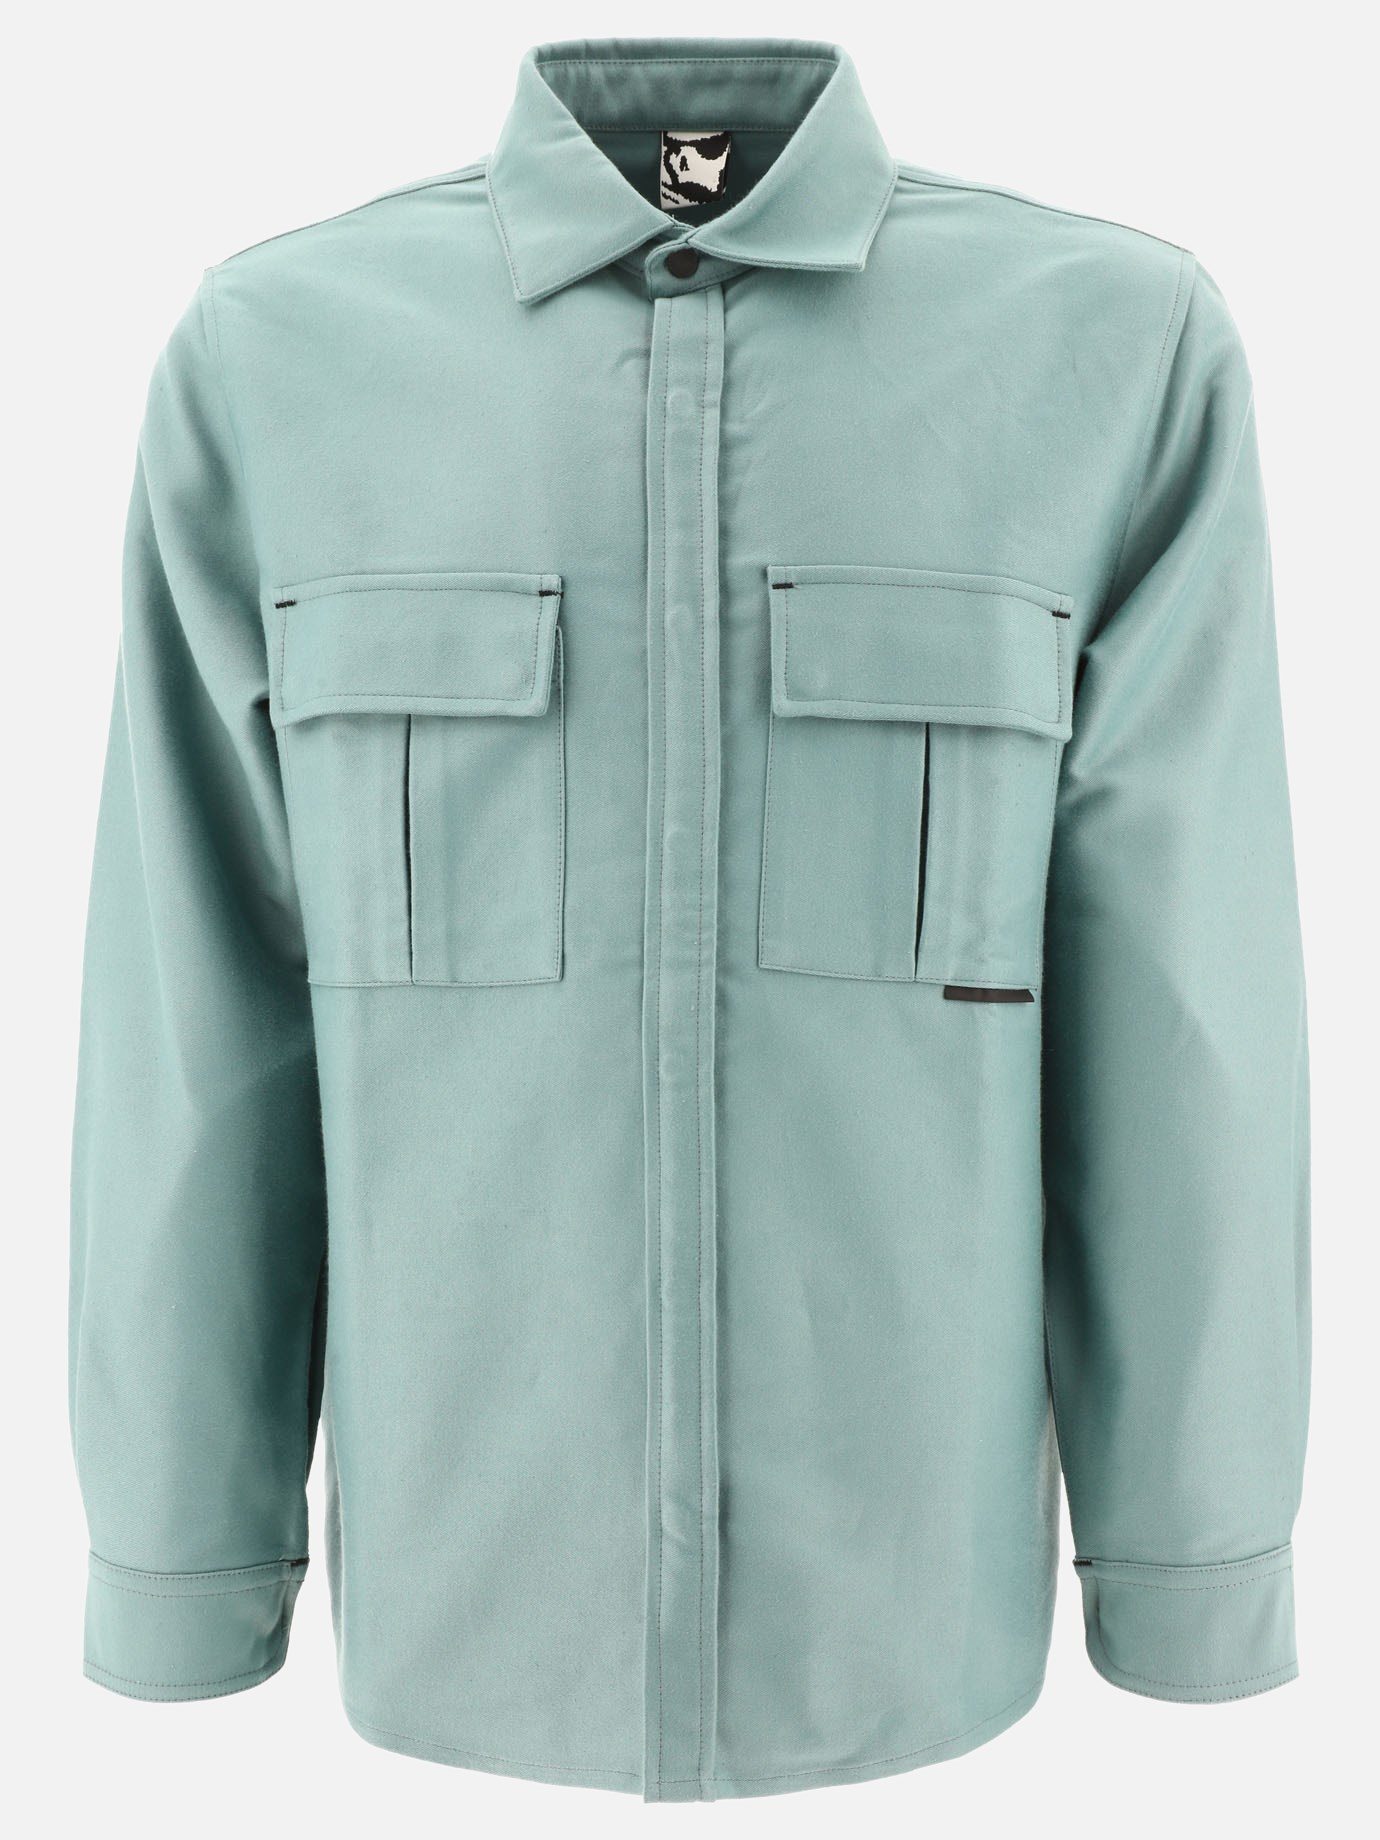 Overshirt  Replicated Bold Fustain  by Gr10K